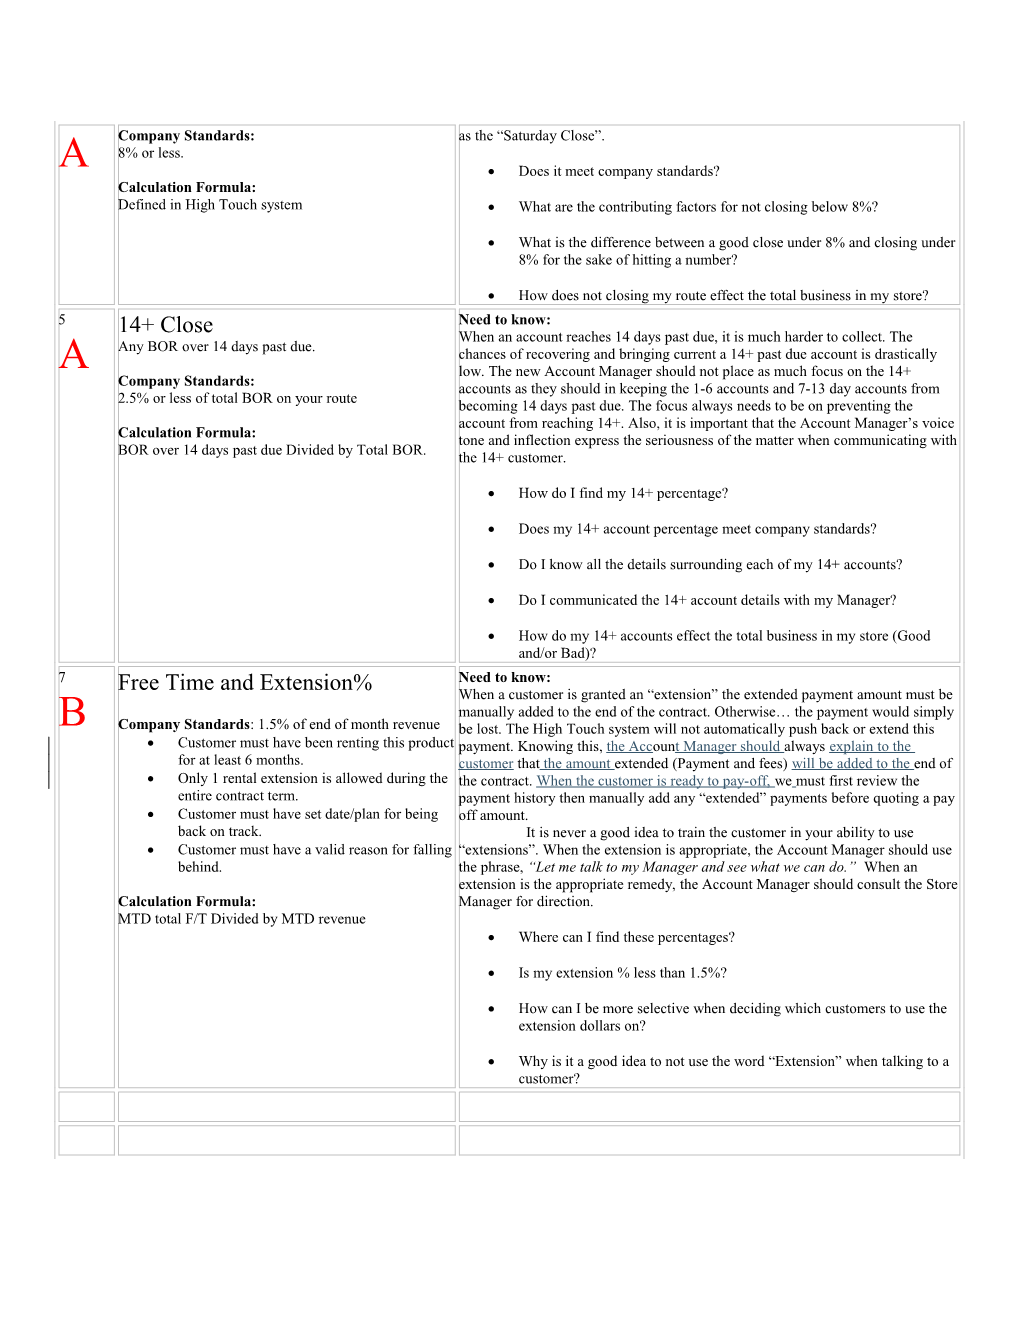 Account Manager Training Checklist 7/18/06